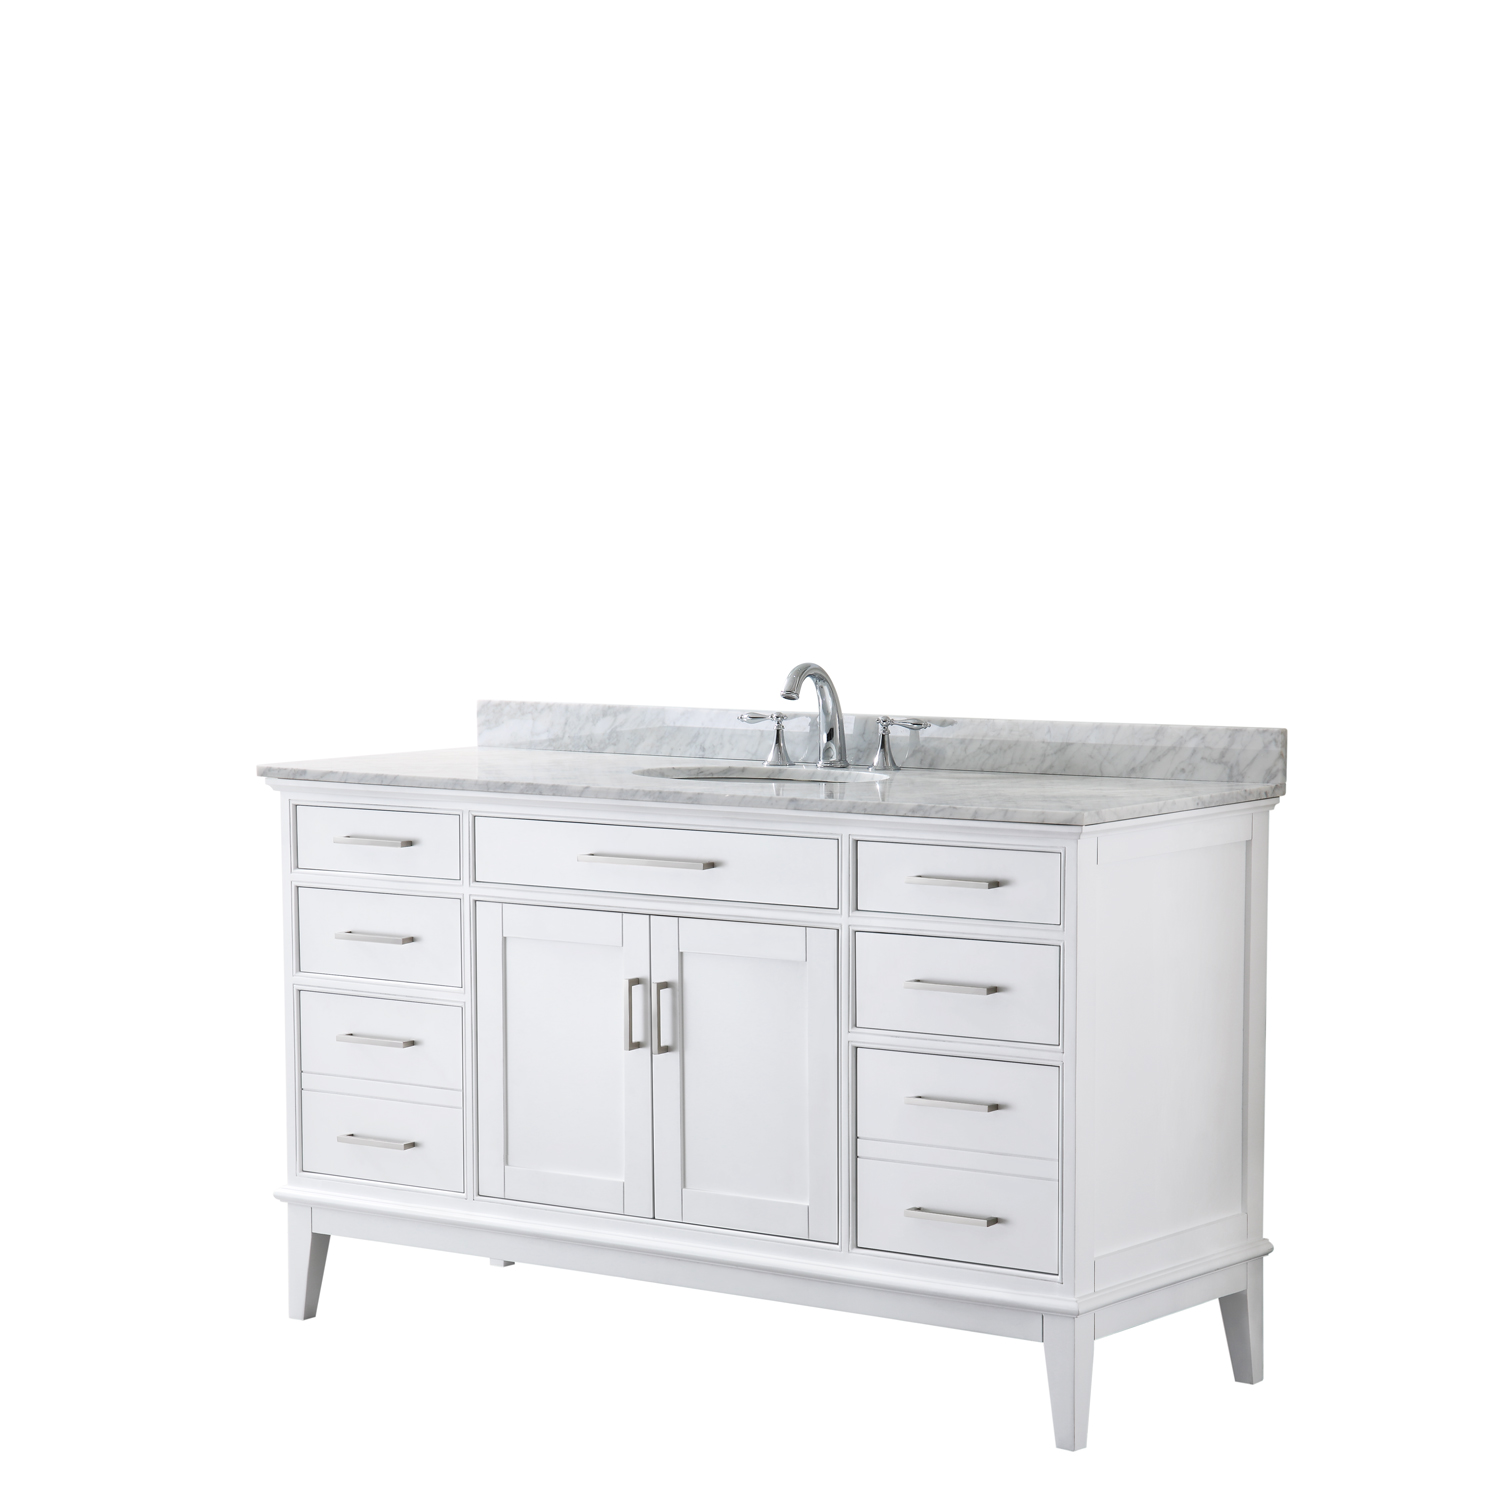 Contemporary 60" Single Bathroom Vanity in White, White Carrara Marble Countertop with Undermount Sink, and Mirror Options